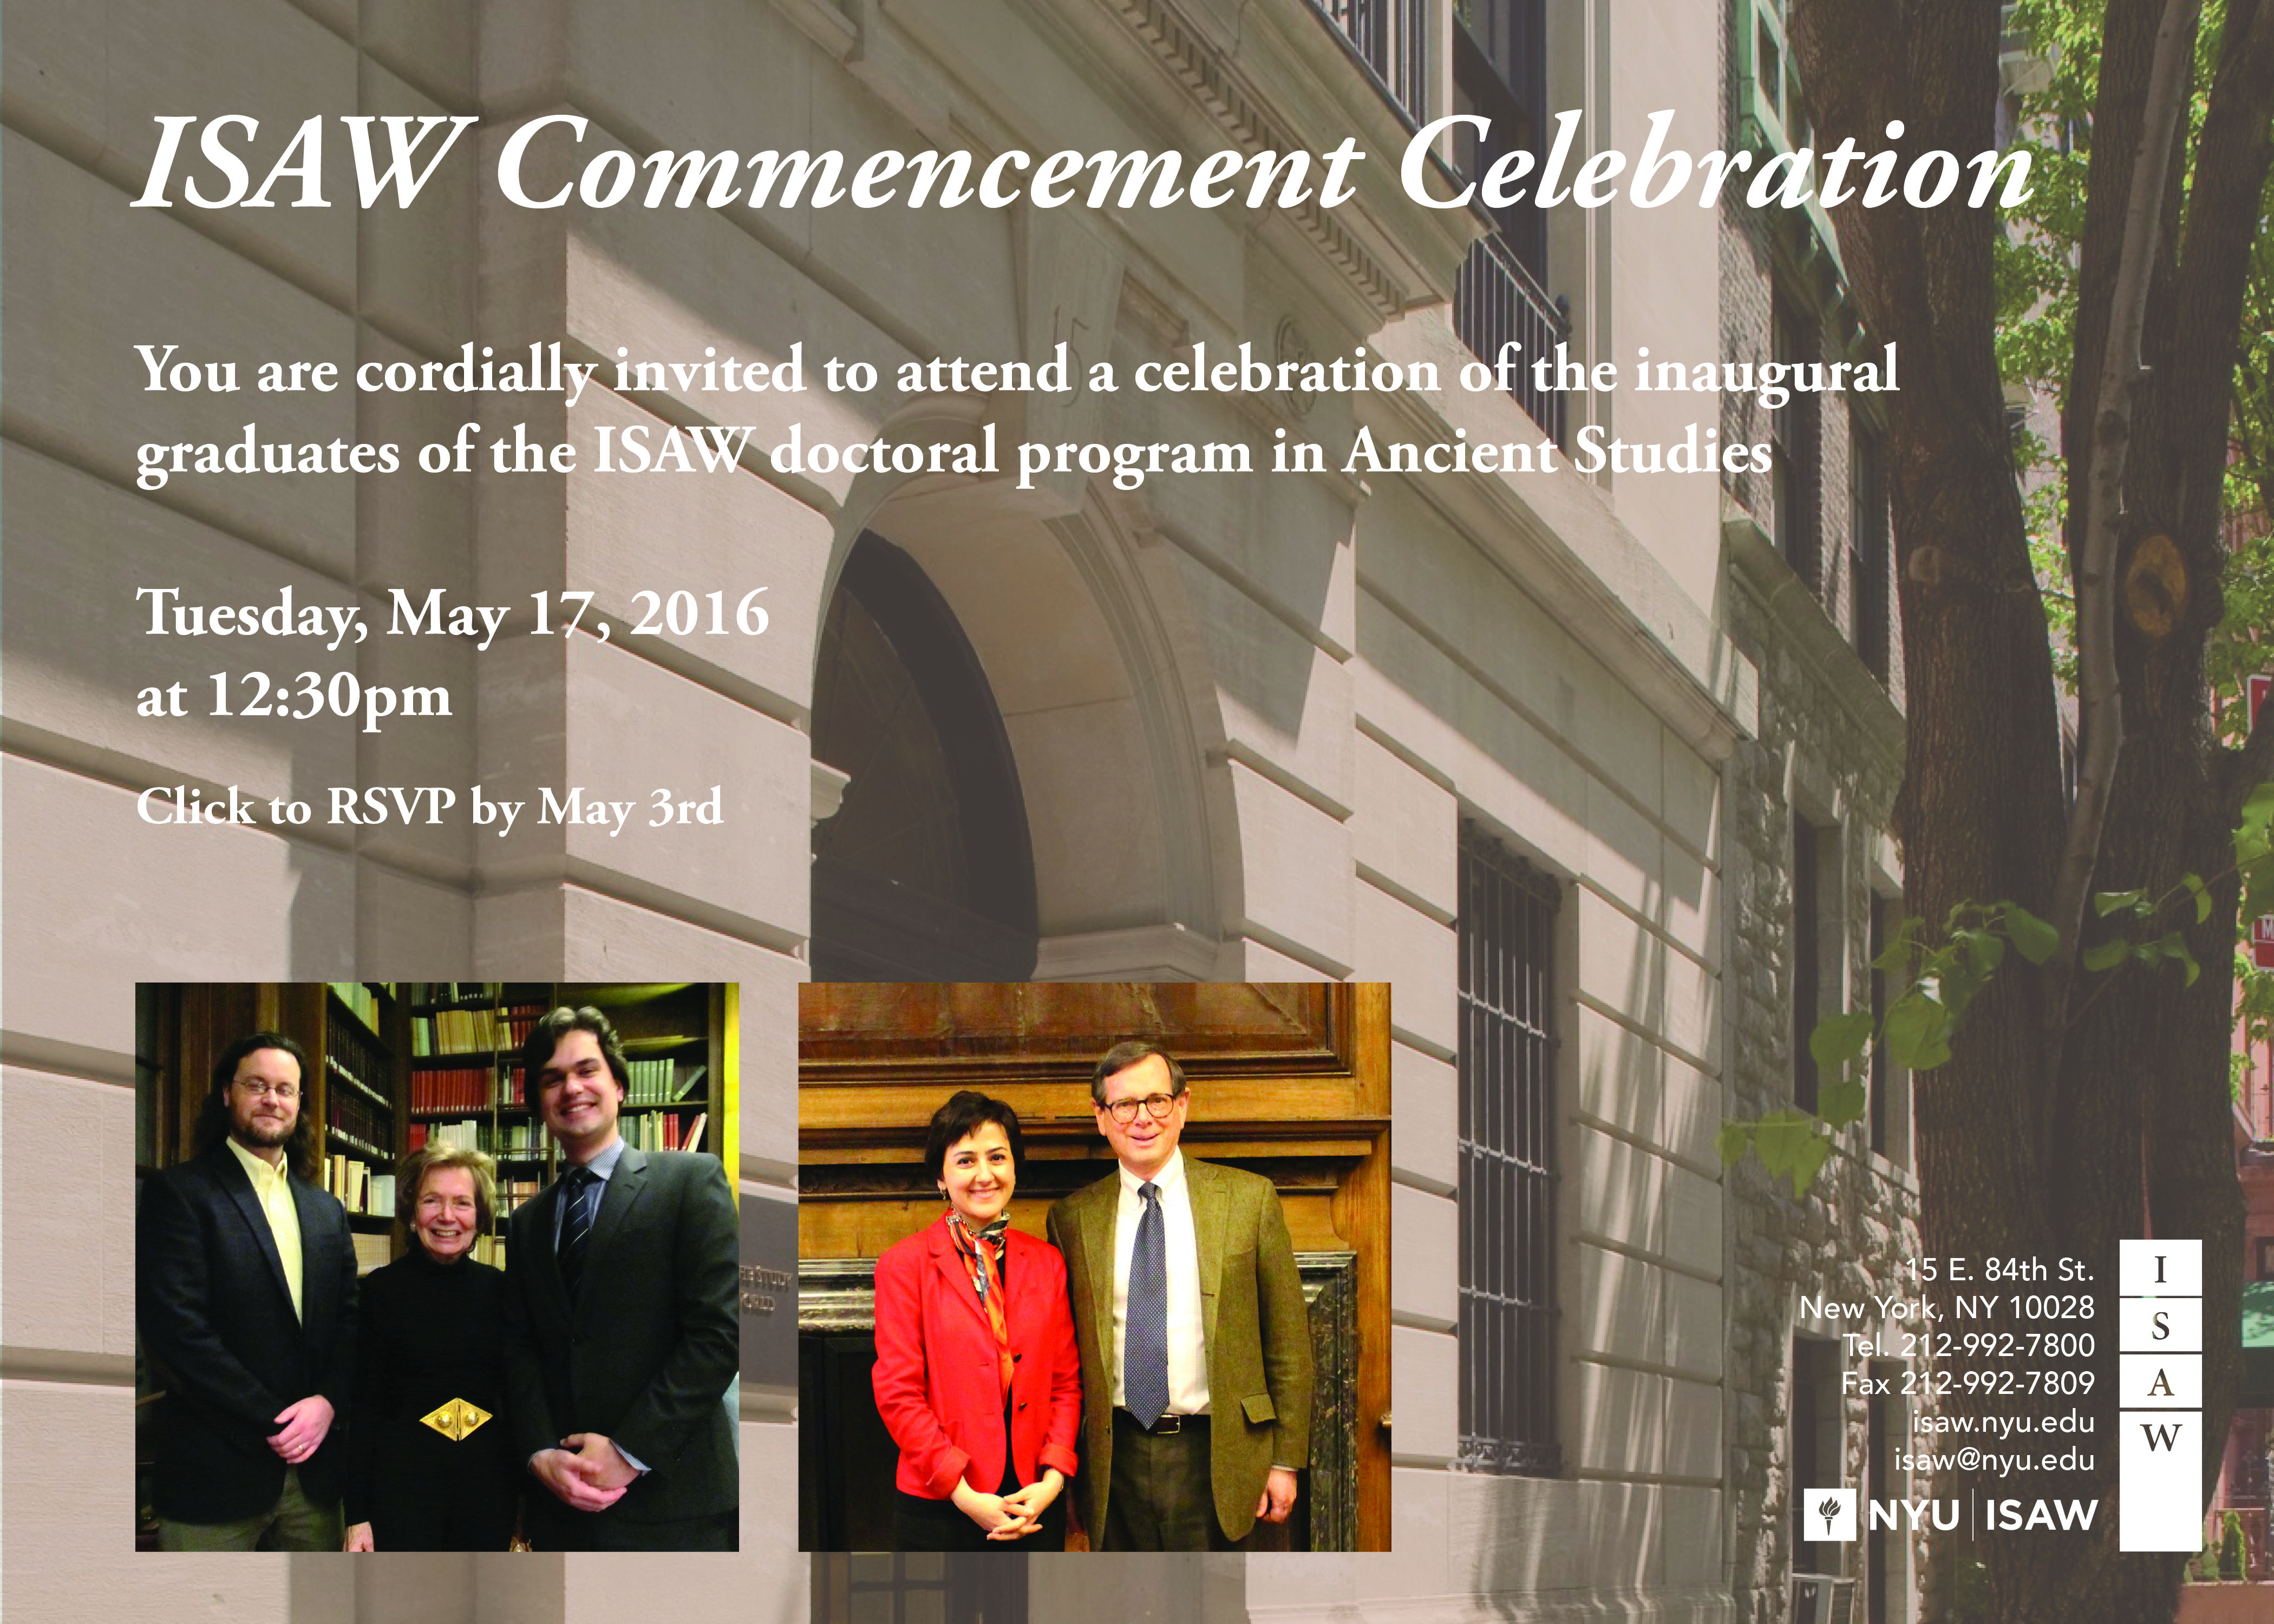 ISAW Commencement Luncheon Reminder